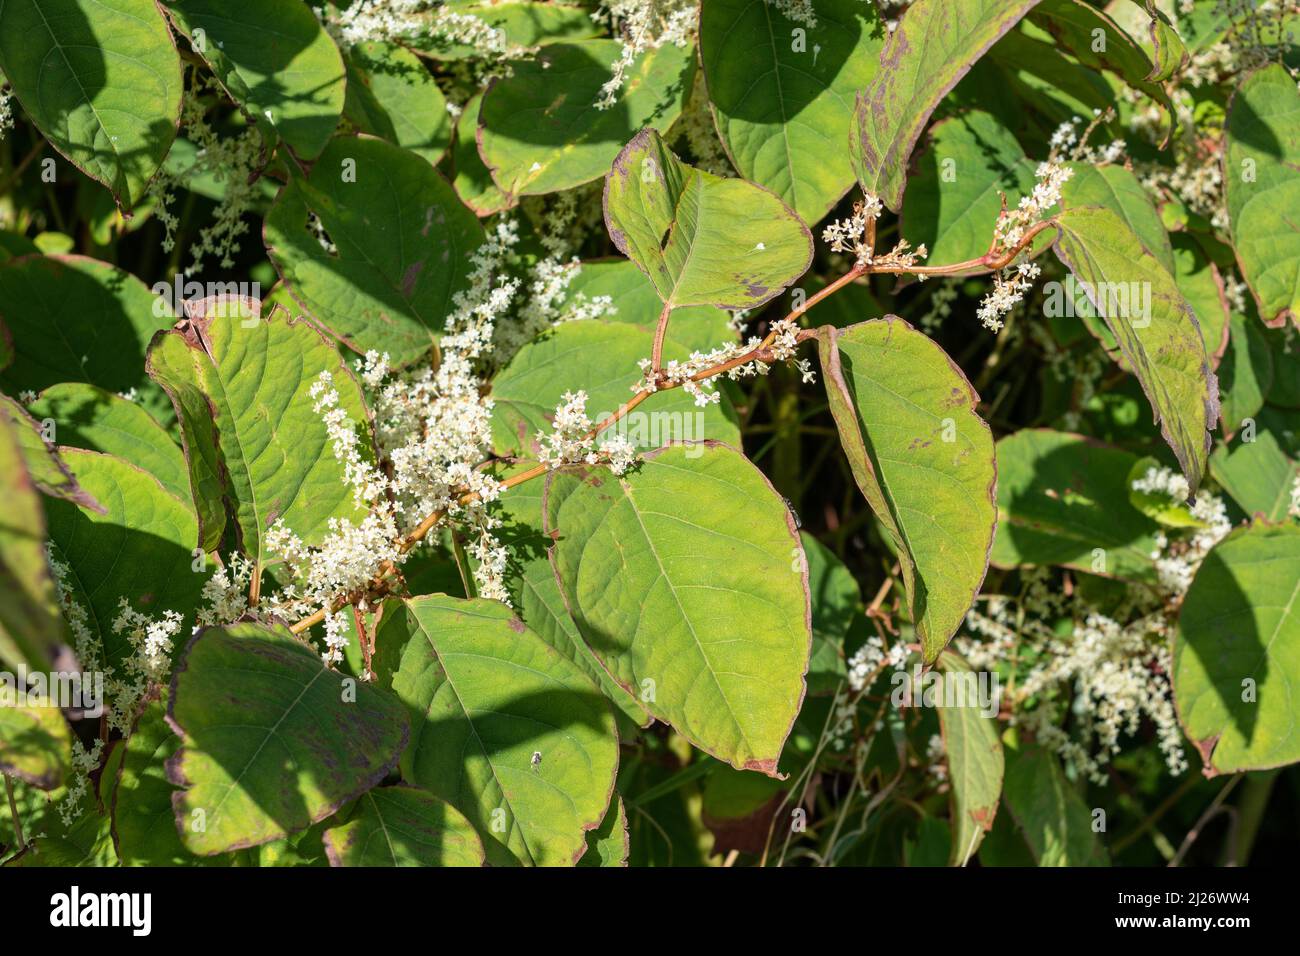 A stem of Japanese Knotweed against a background of a bank of the plant. The stem clearly shows the white flowers and zig-zag patterning of alternatin Stock Photo